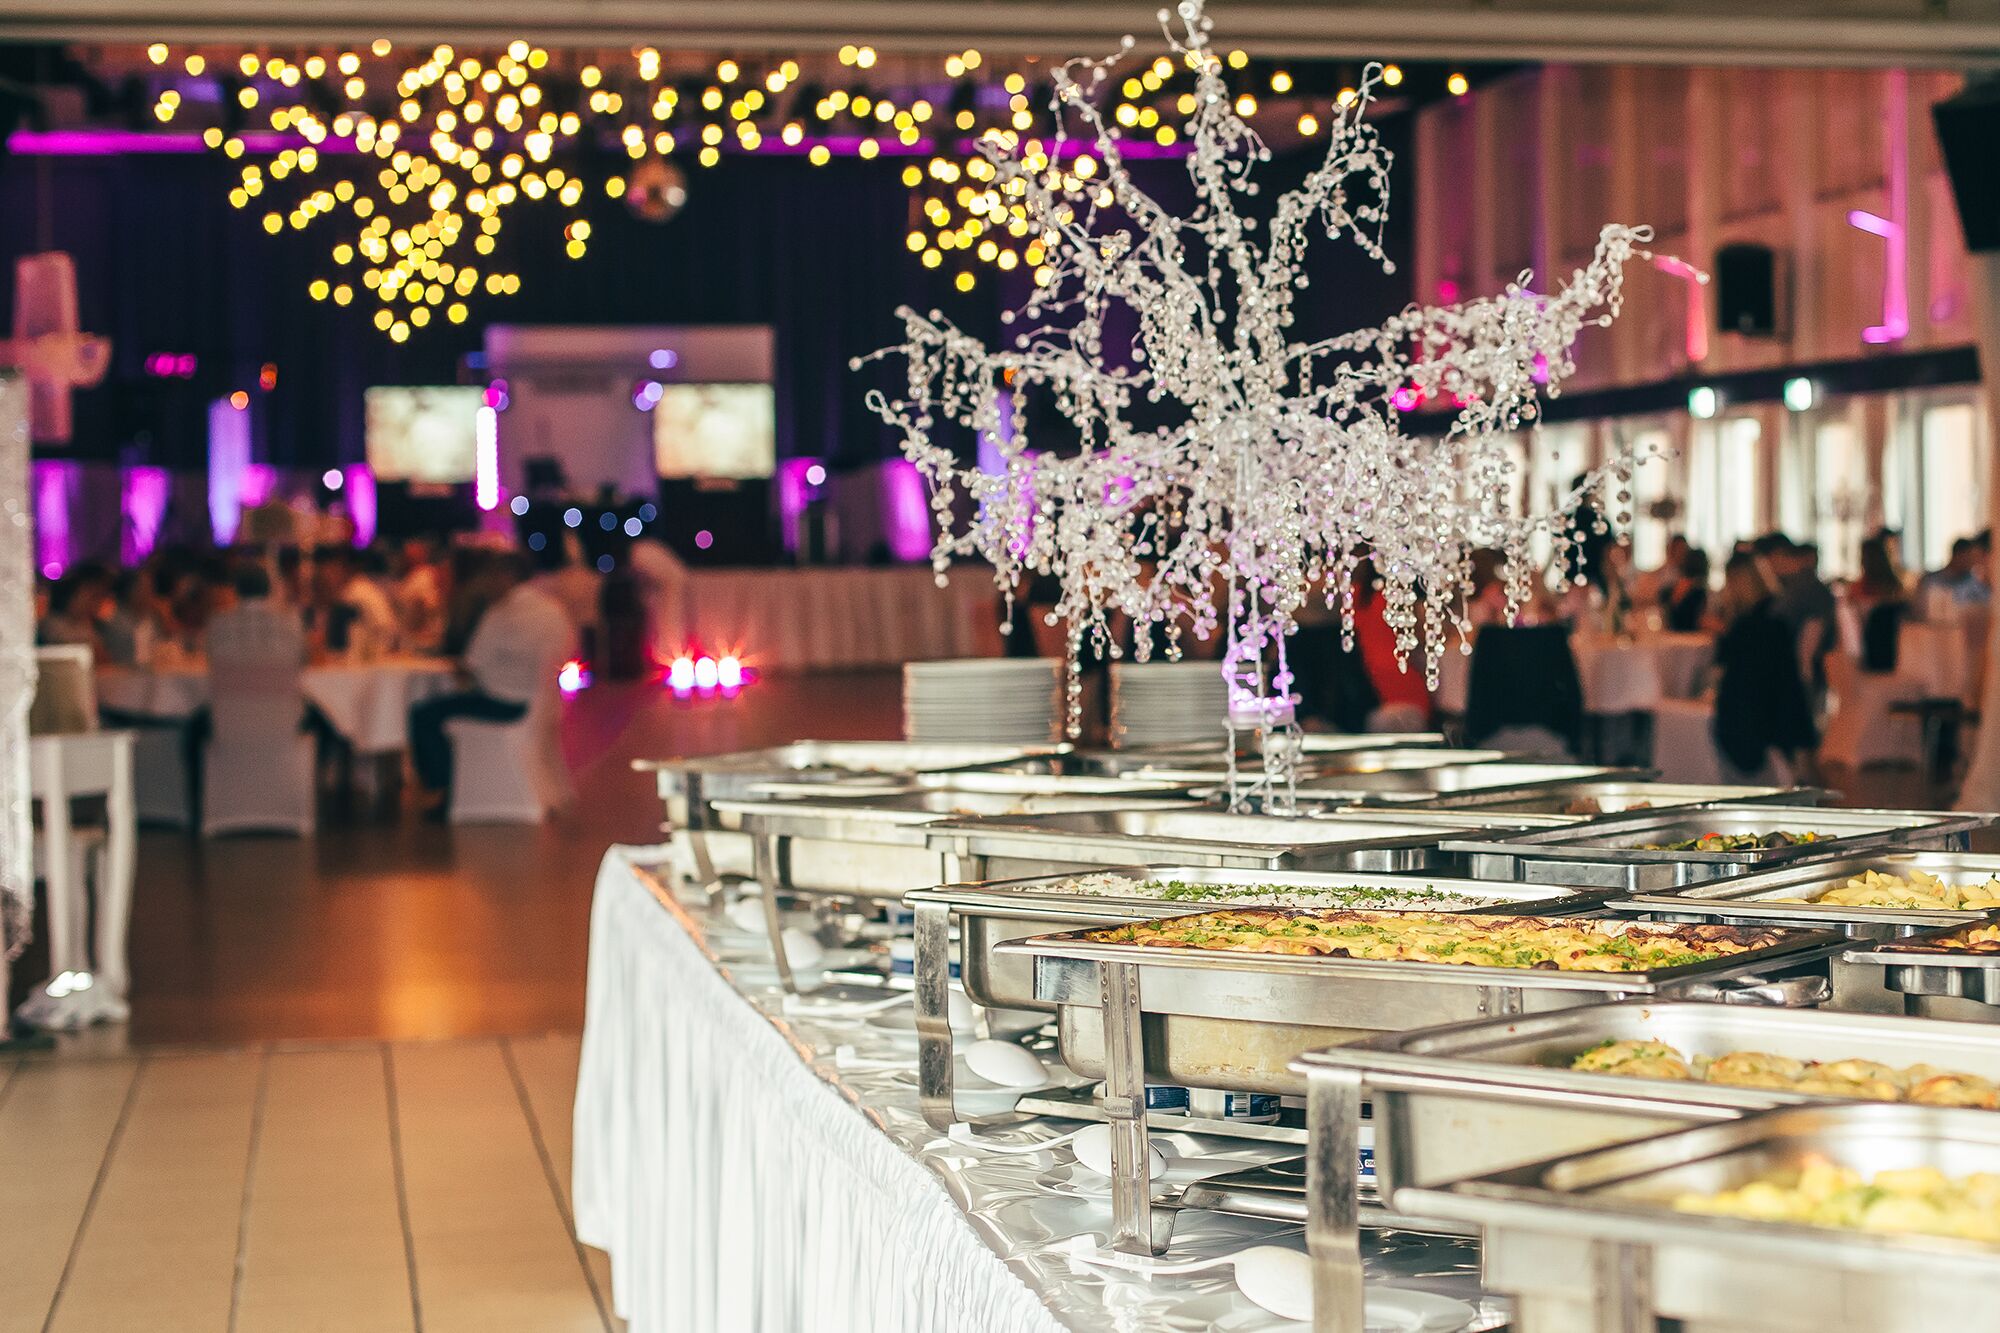 Buffet catering at a wedding